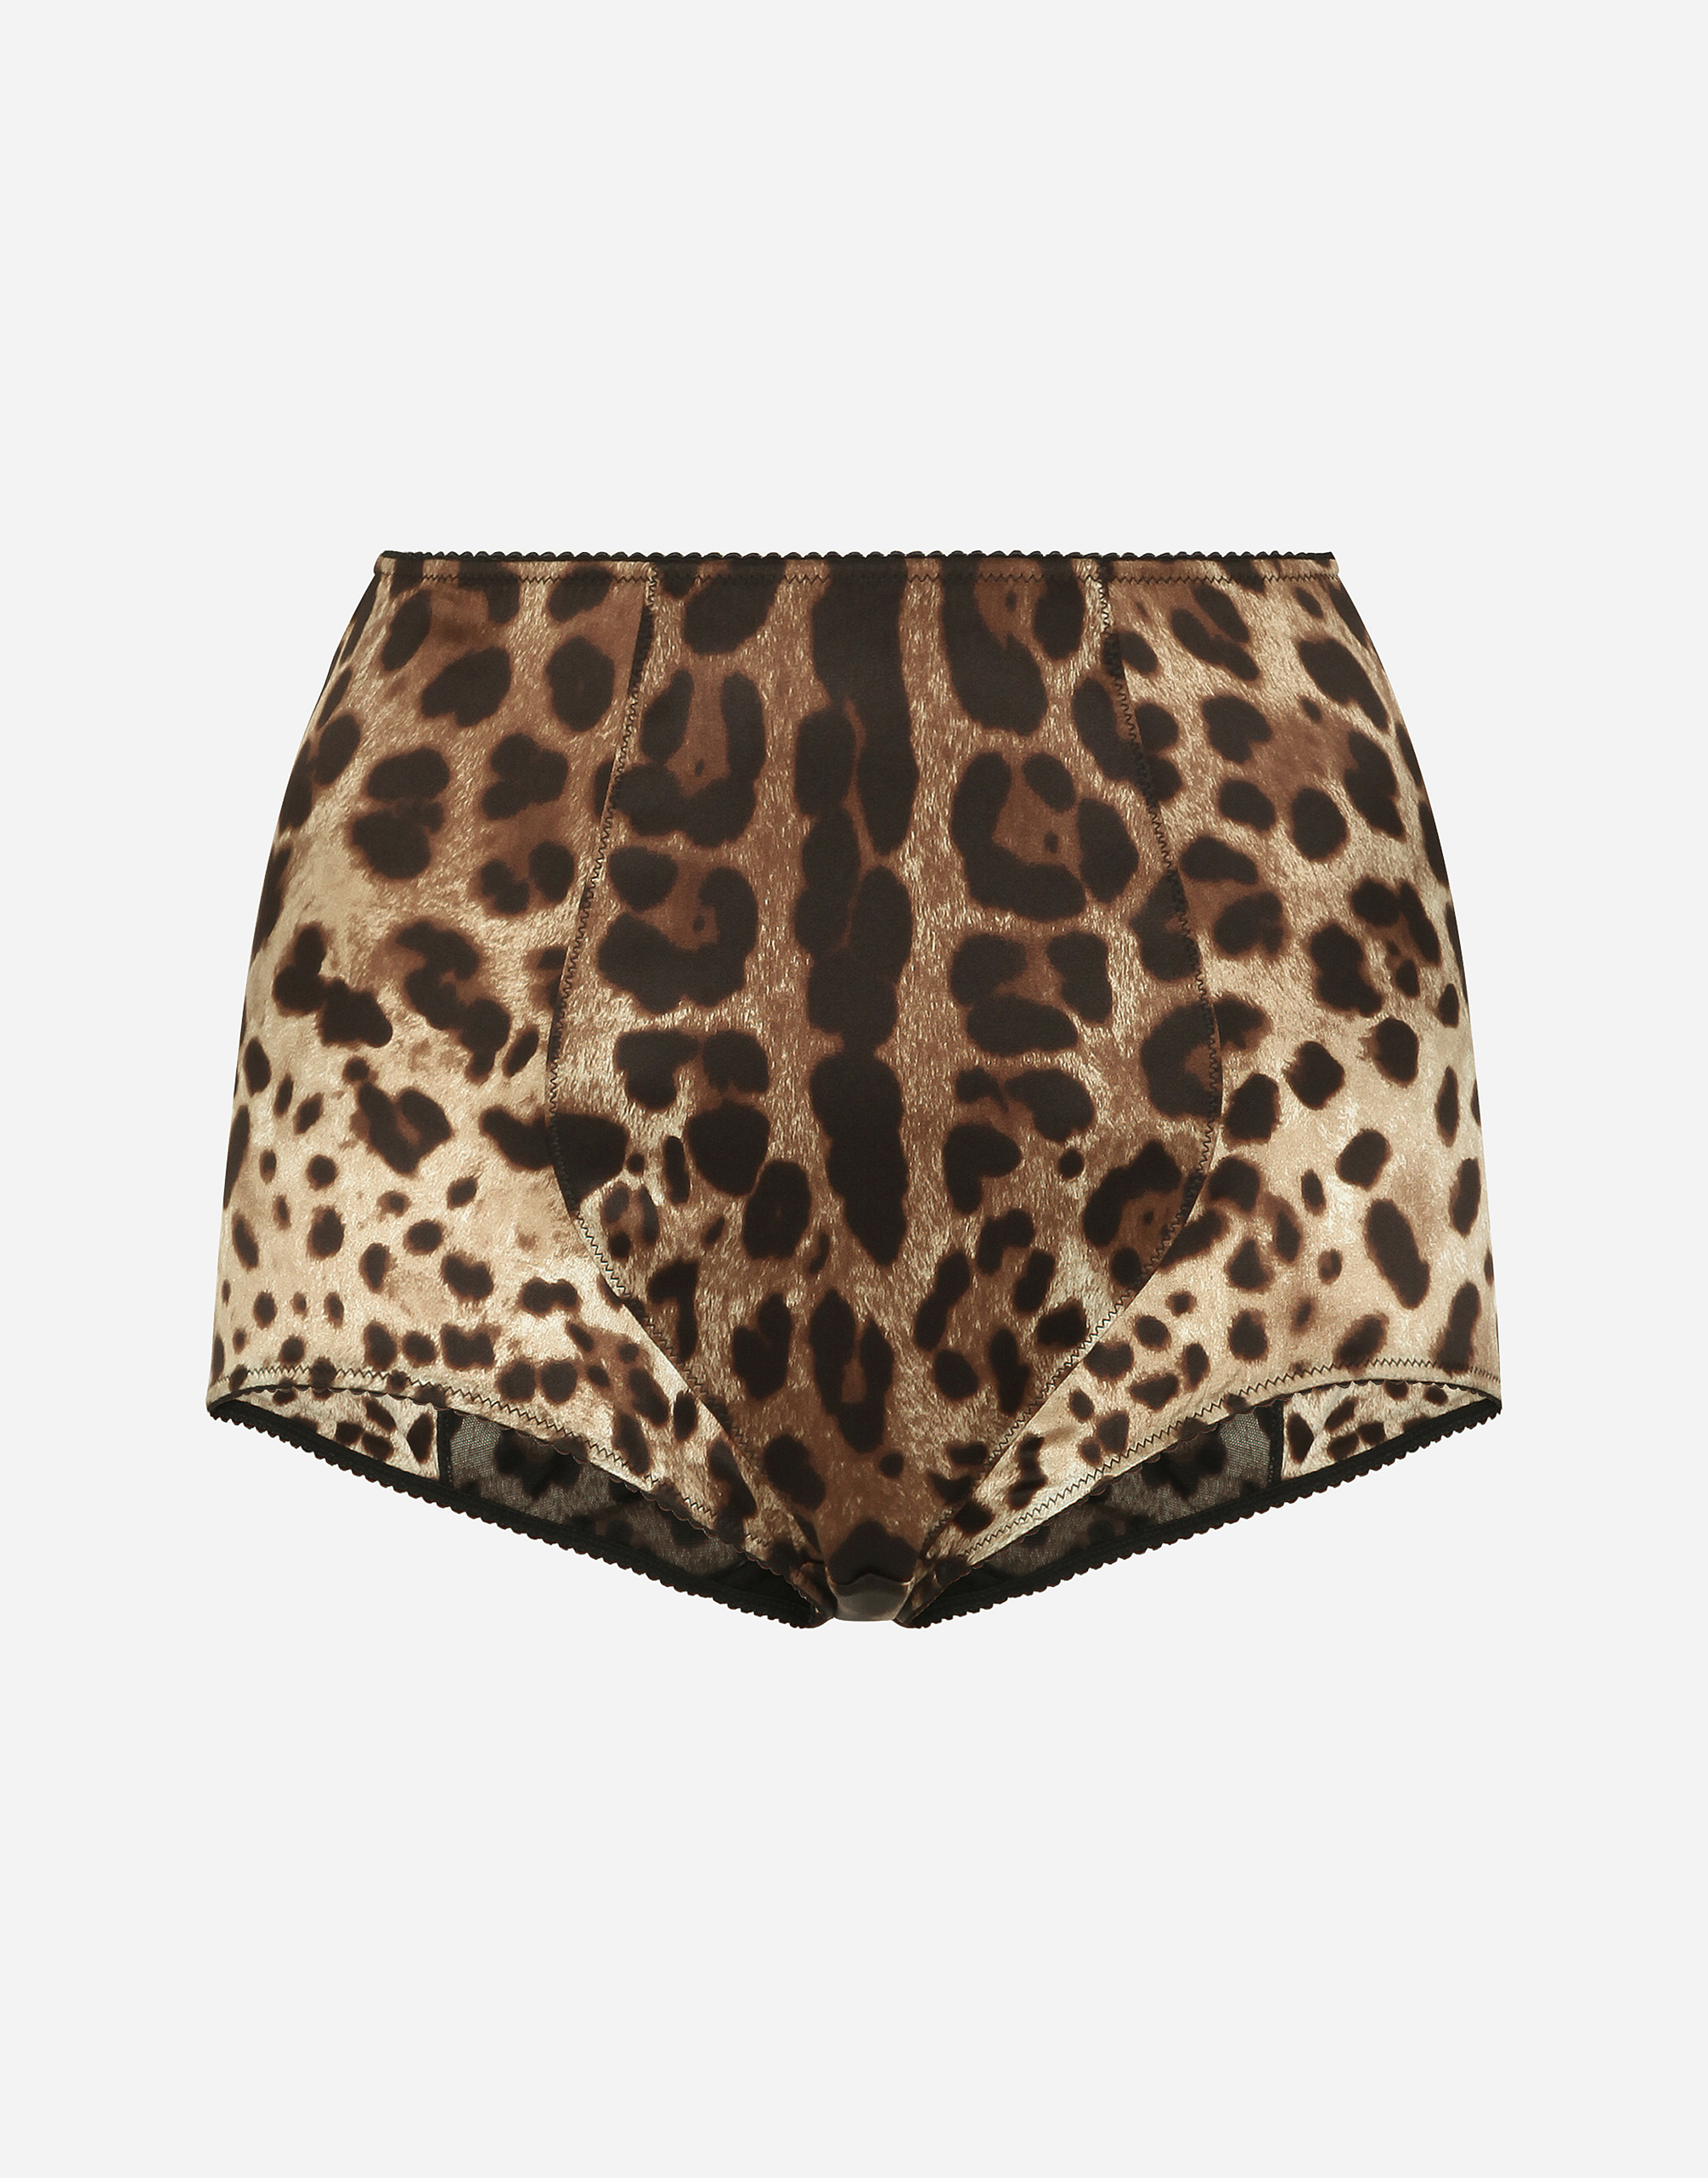 Satin culottes with leopard print in Multicolor for Women 